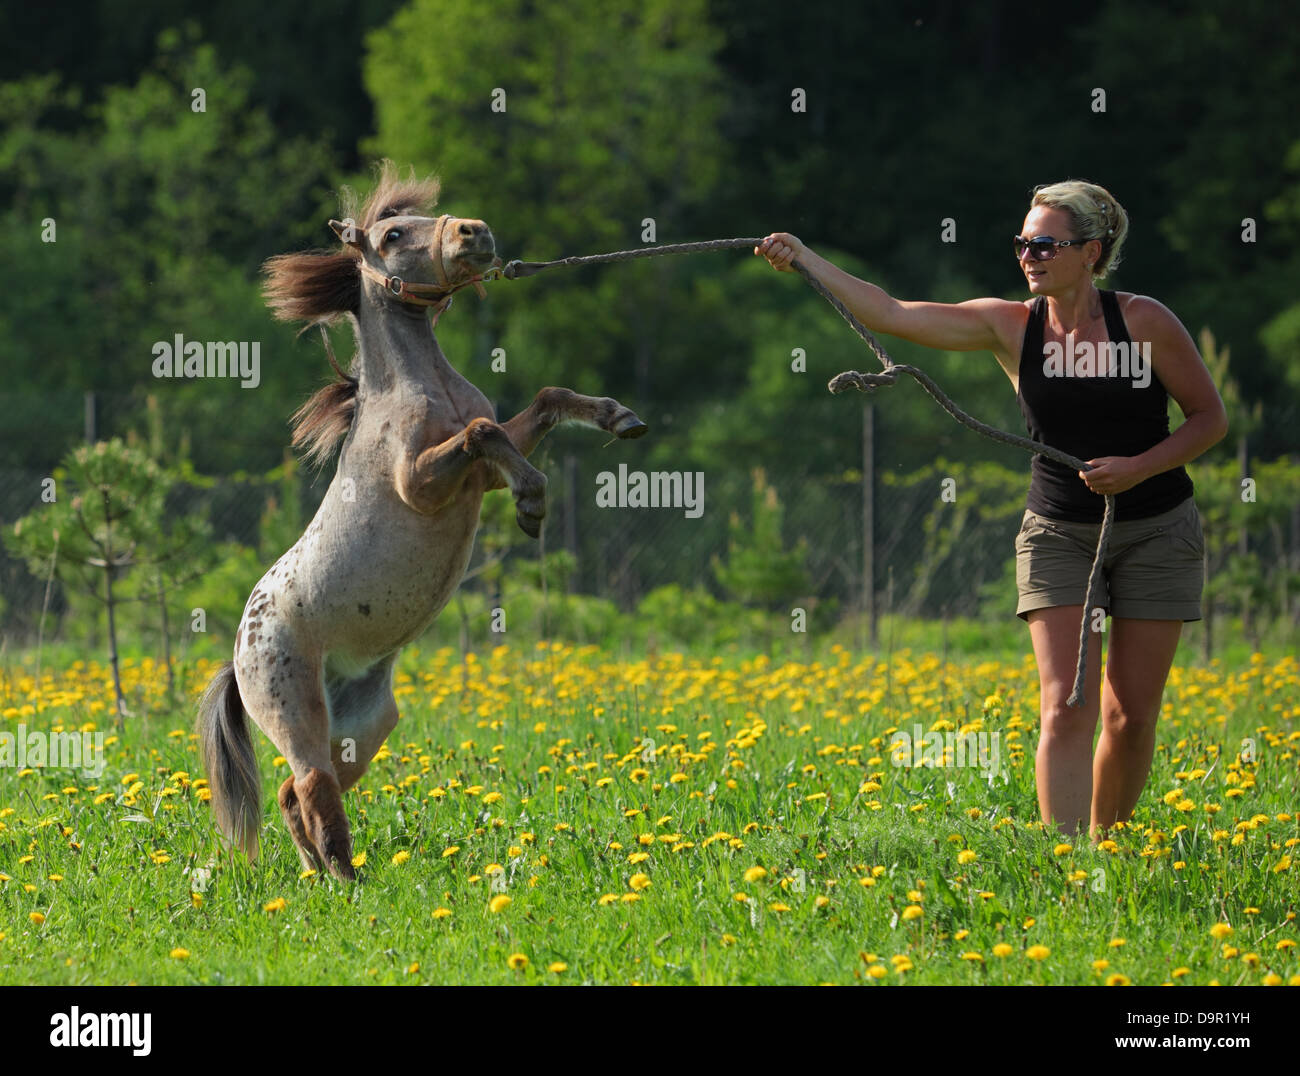 Woman plays with a prancing pony on a summer meadow Stock Photo